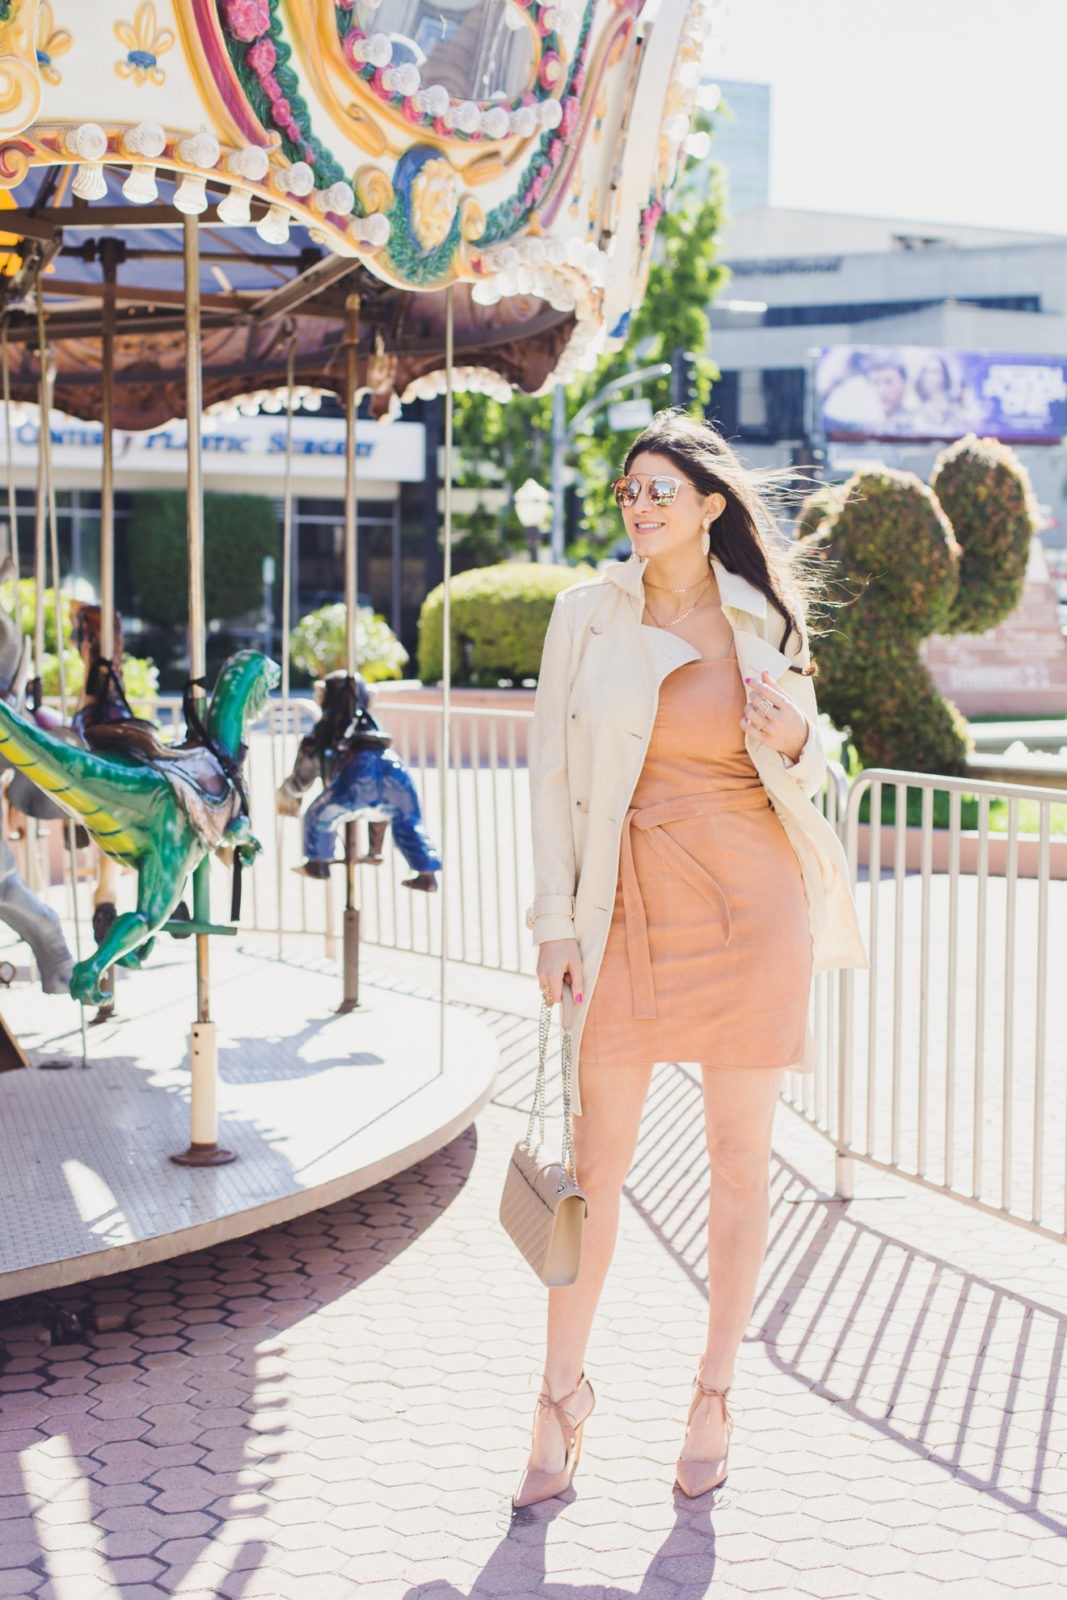 Spring Work Outfits featured by top US Fashion Blogger Laura Lily; AS BY DF DRESS, ANN TAYLOR JACKET, SAINT LAURENT BAG, ZENDAYA SHOES, ALDO SHOES SUNGLASSES, BAUBLE BAR NECKLACE AND SUGAR FIX BY BAUBLE BAR EARRINGS.